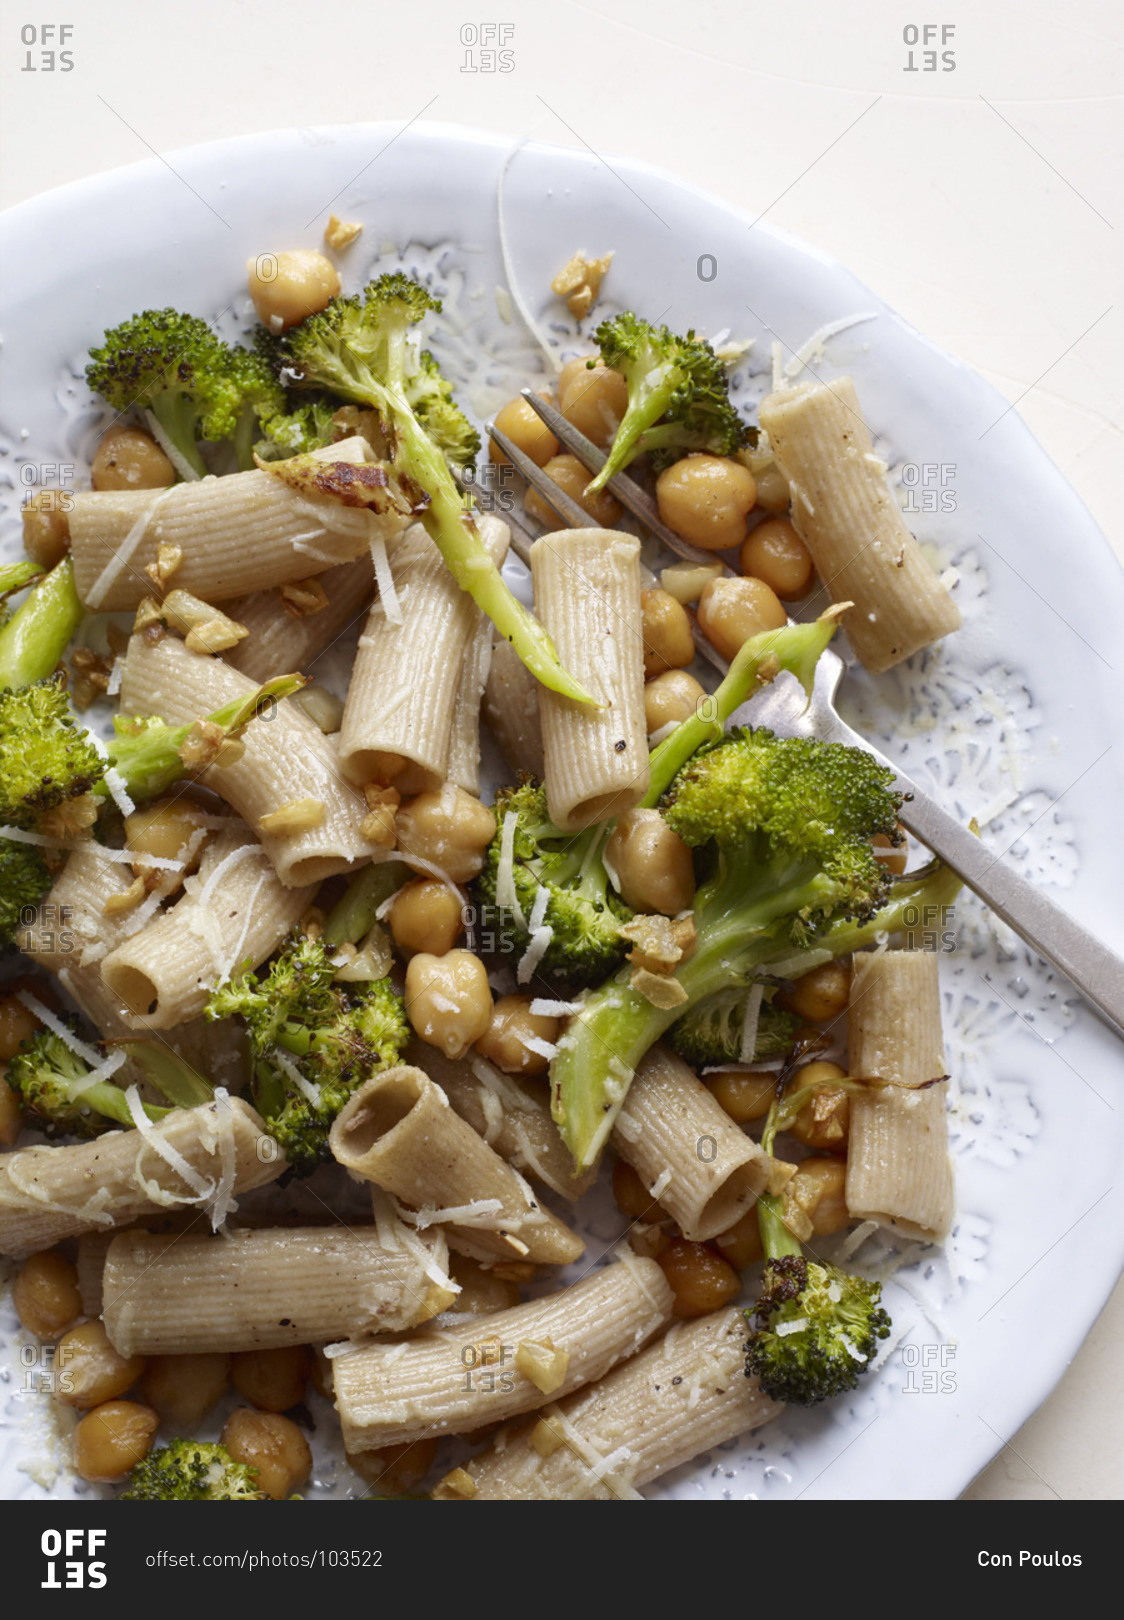 Rigatoni with roasted broccoli and chickpeas